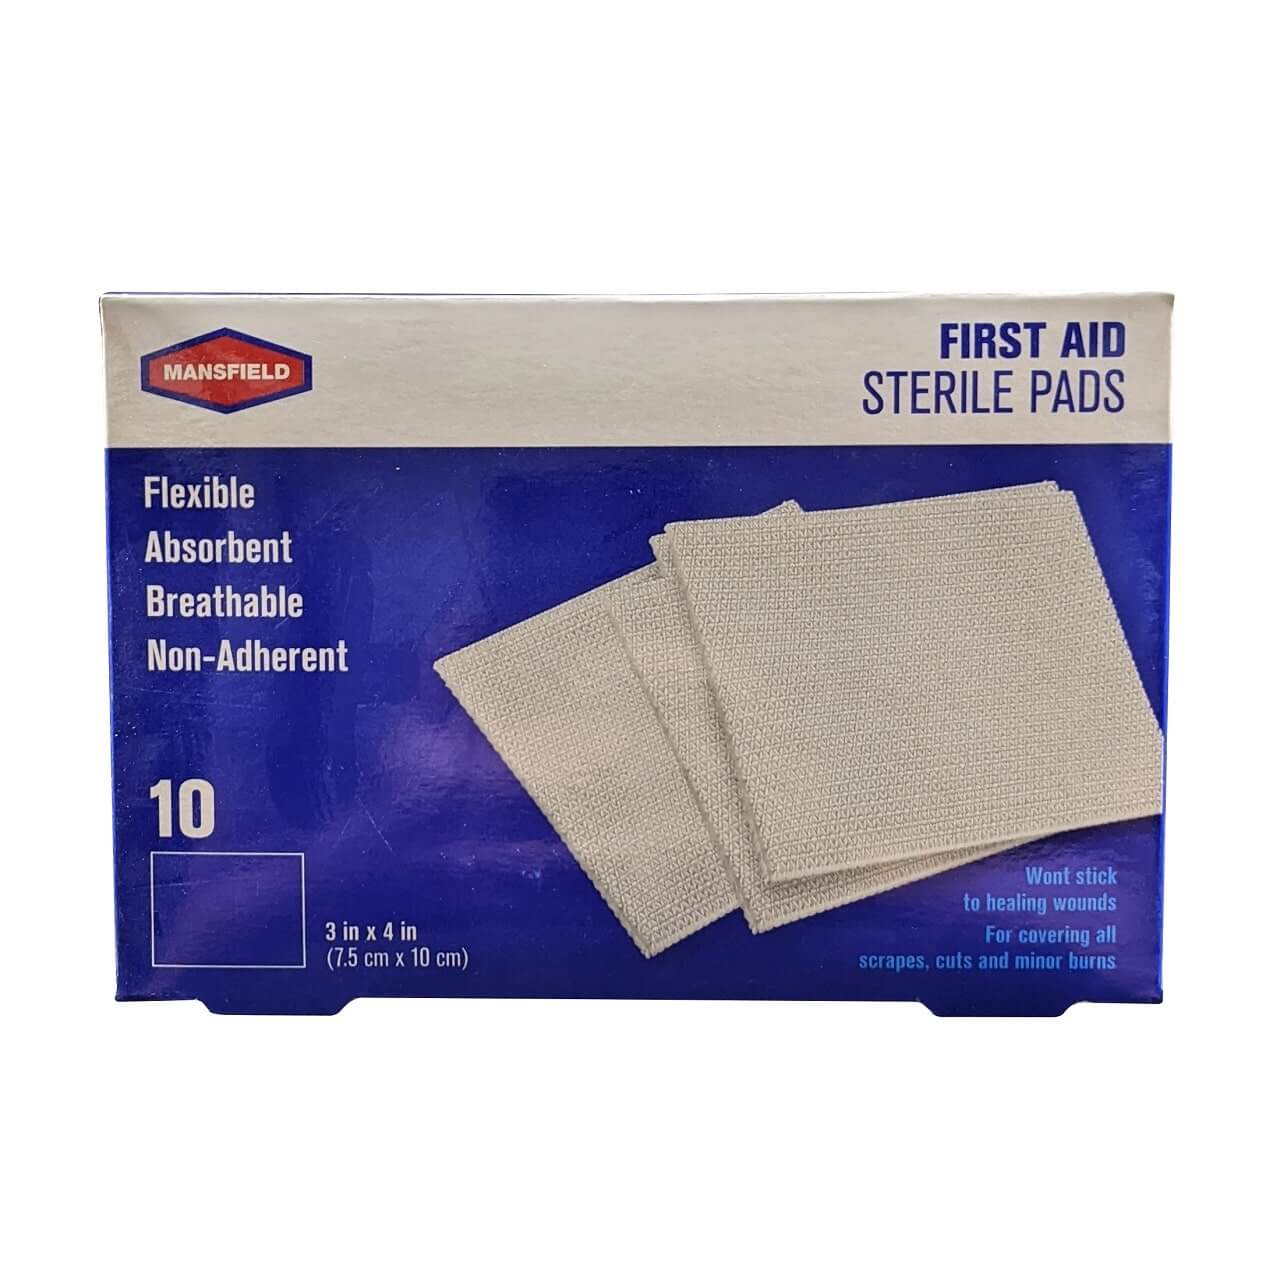 Product label for Mansfield First Aid Sterile Pads (7.5 cm x 10 cm) (10 pads) in English